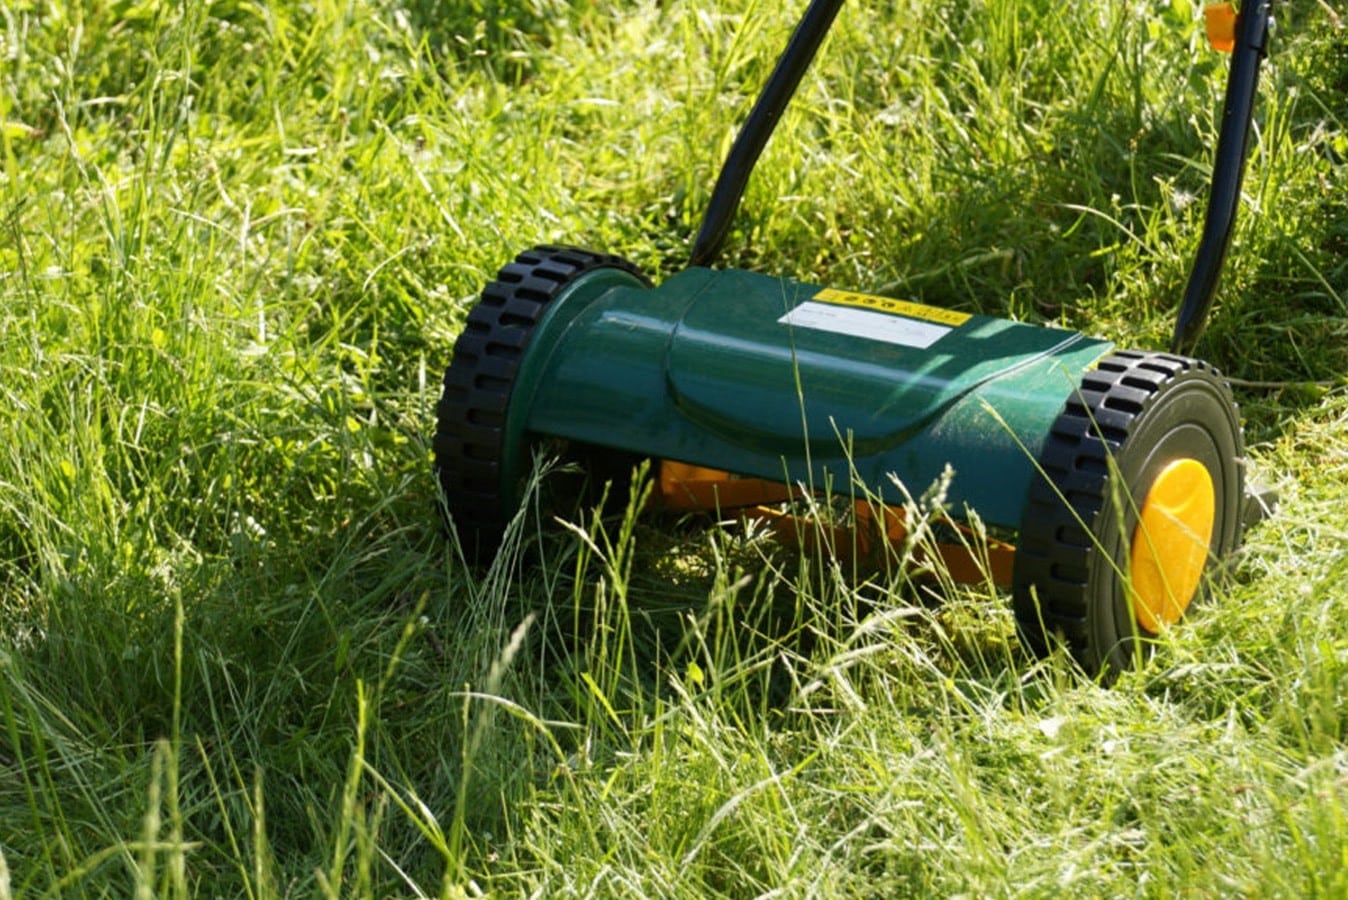 How To Cut Tall Grass With A Reel Mower